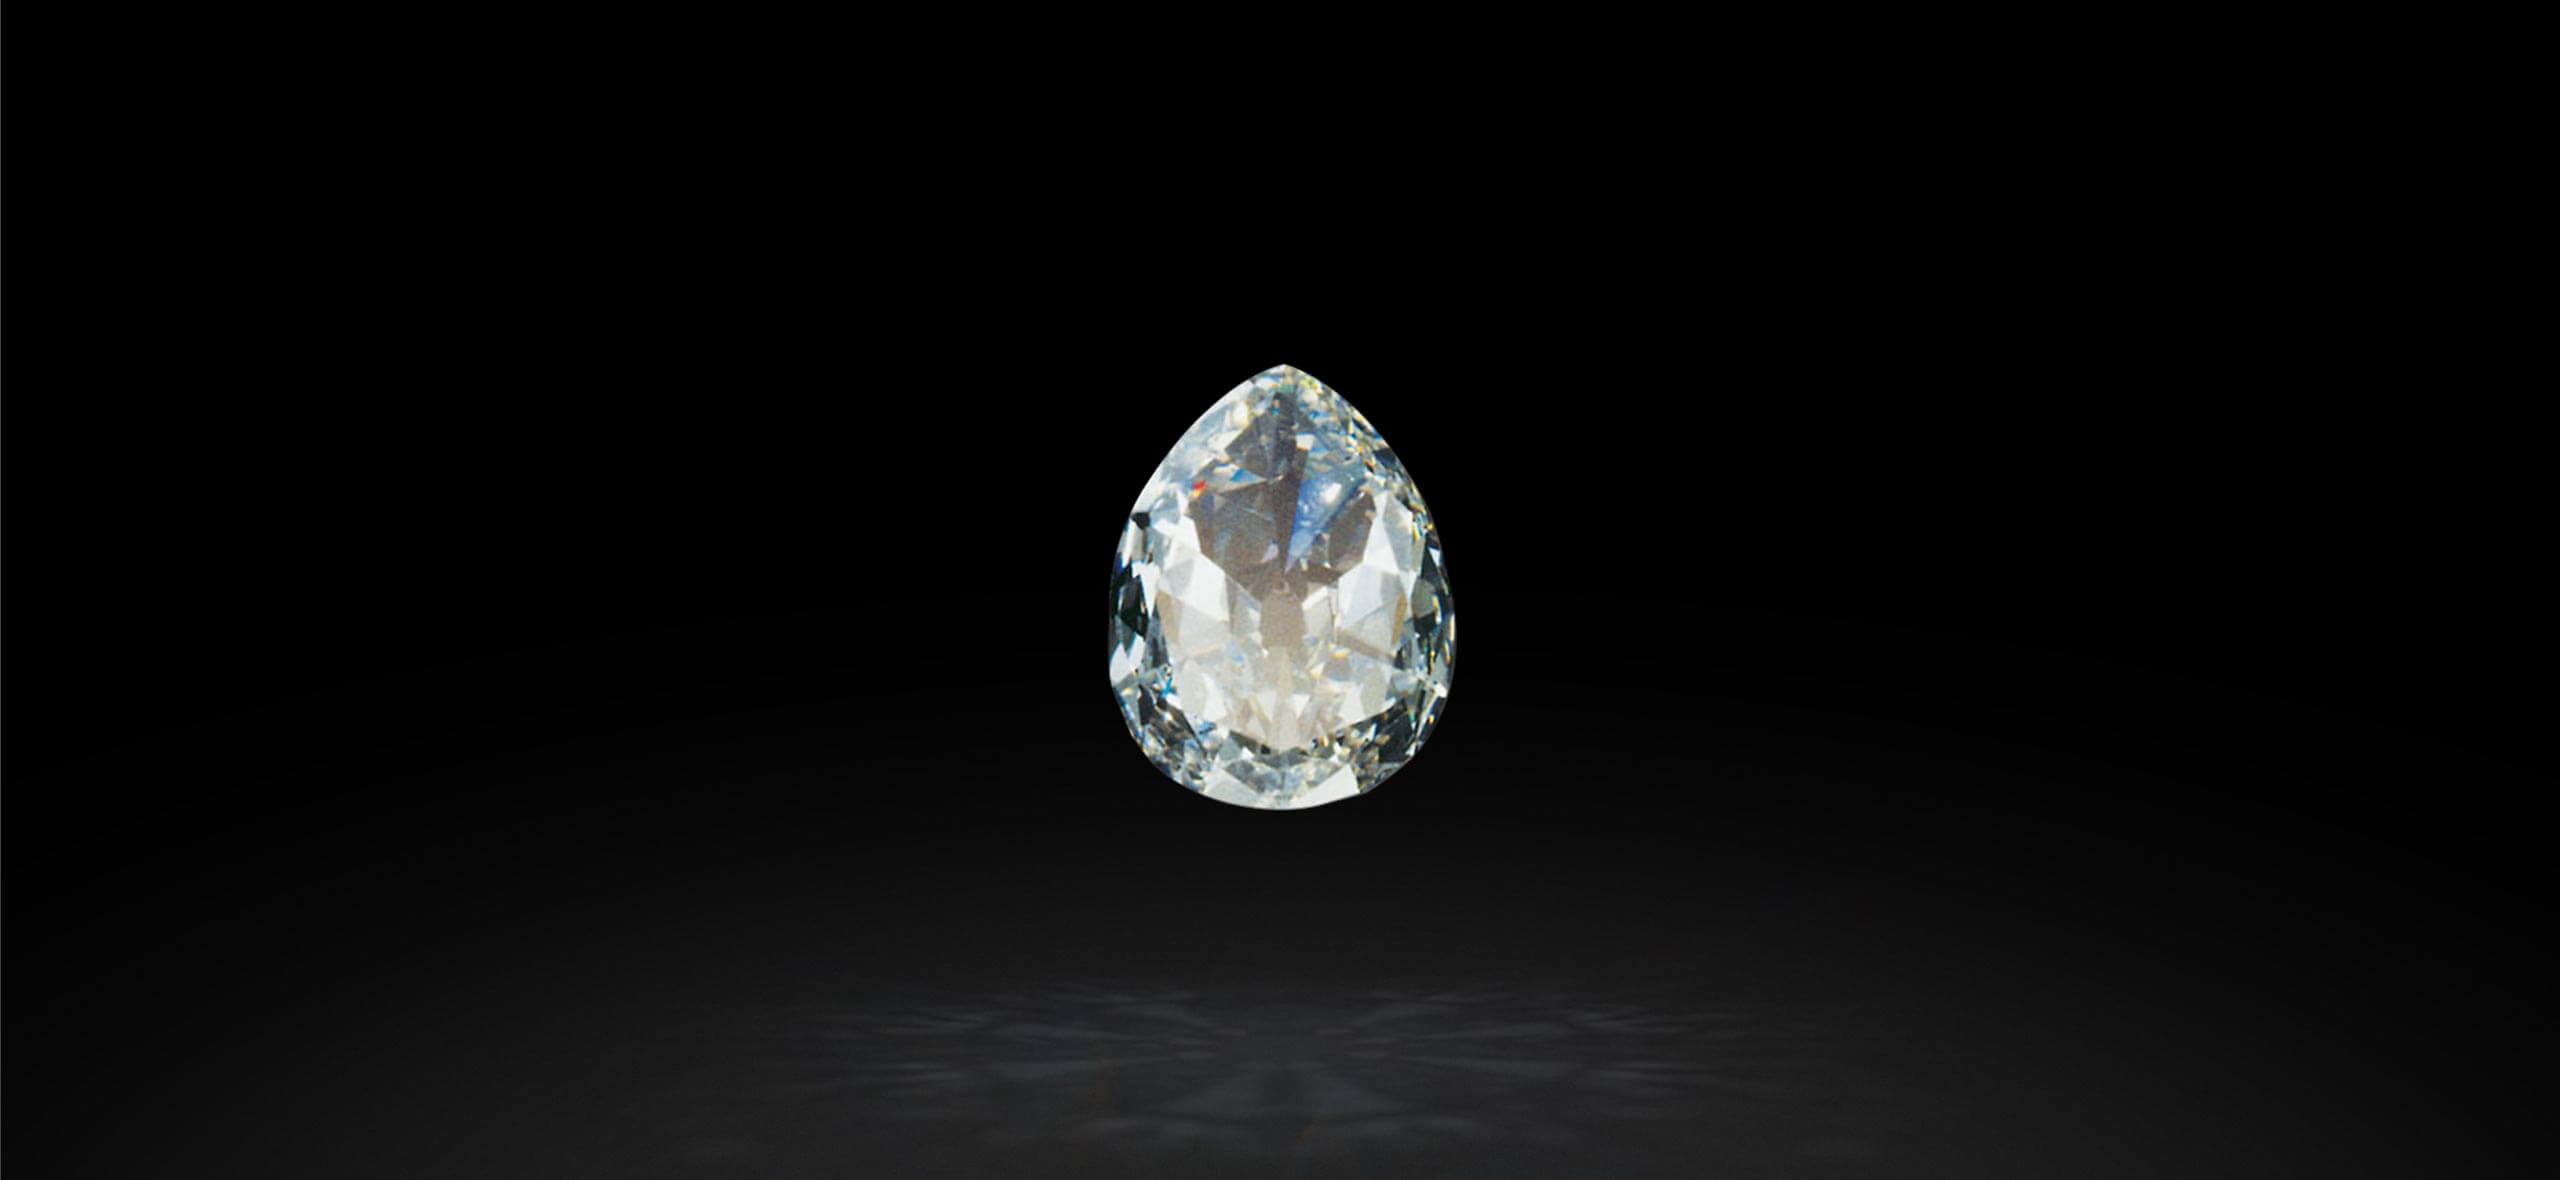 The Premier Rose Diamond – The Cullinan Diamond’s Younger Cousin